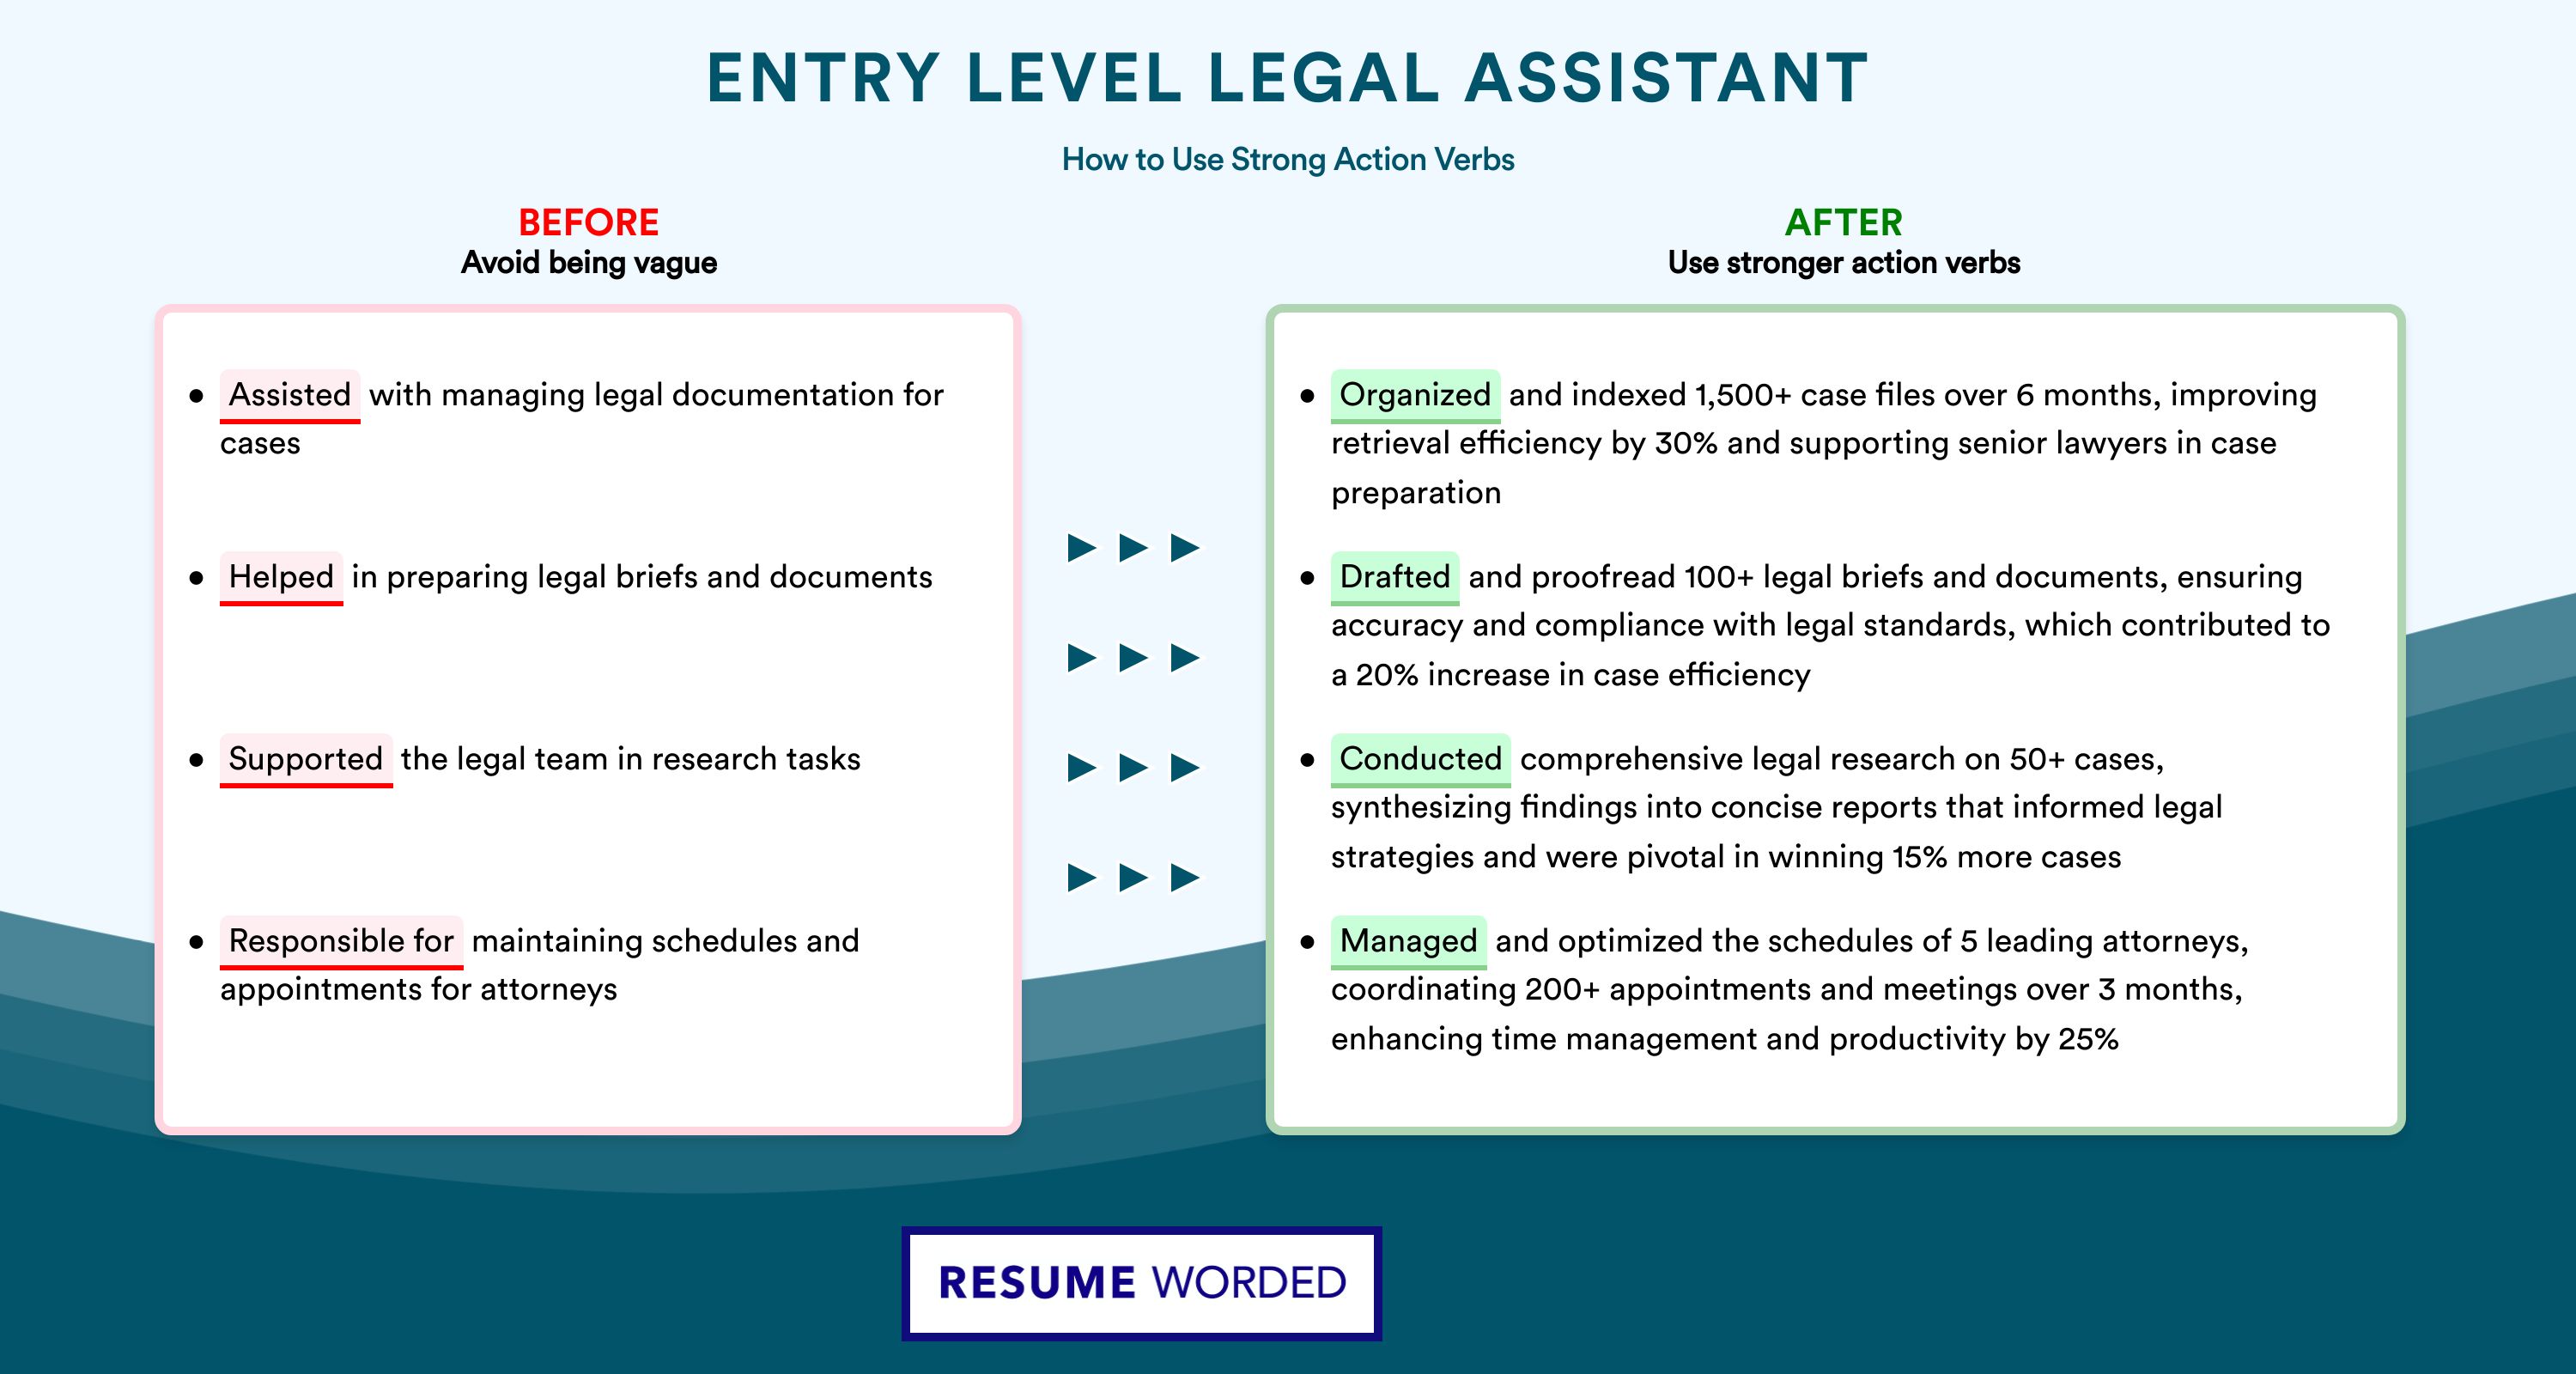 Action Verbs for Entry Level Legal Assistant